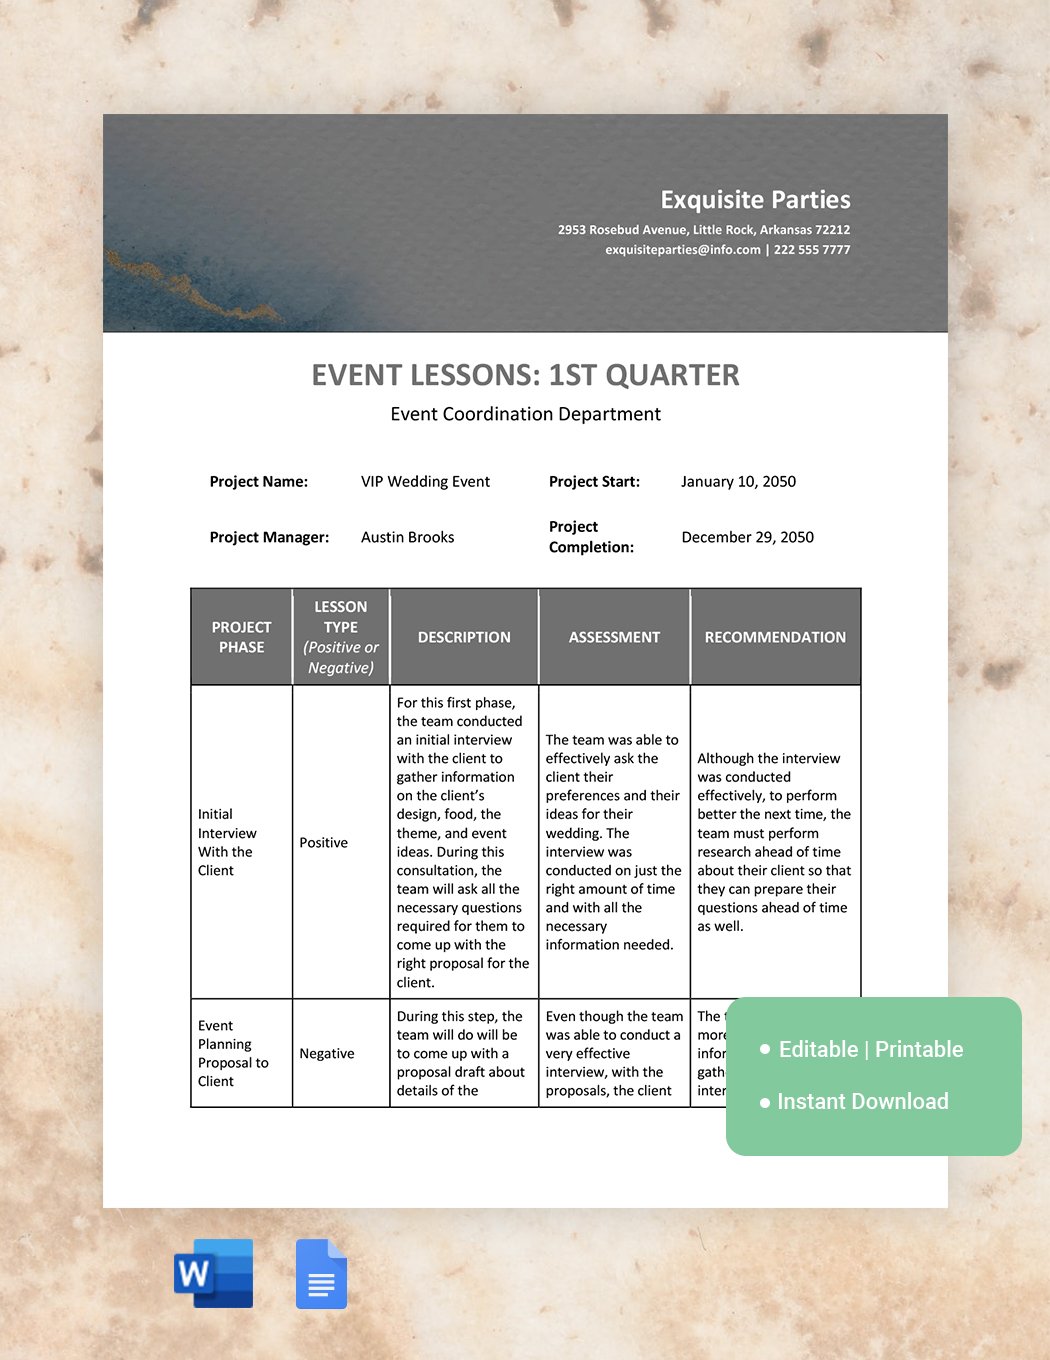 Event Lessons Learned Template in Word, Google Docs